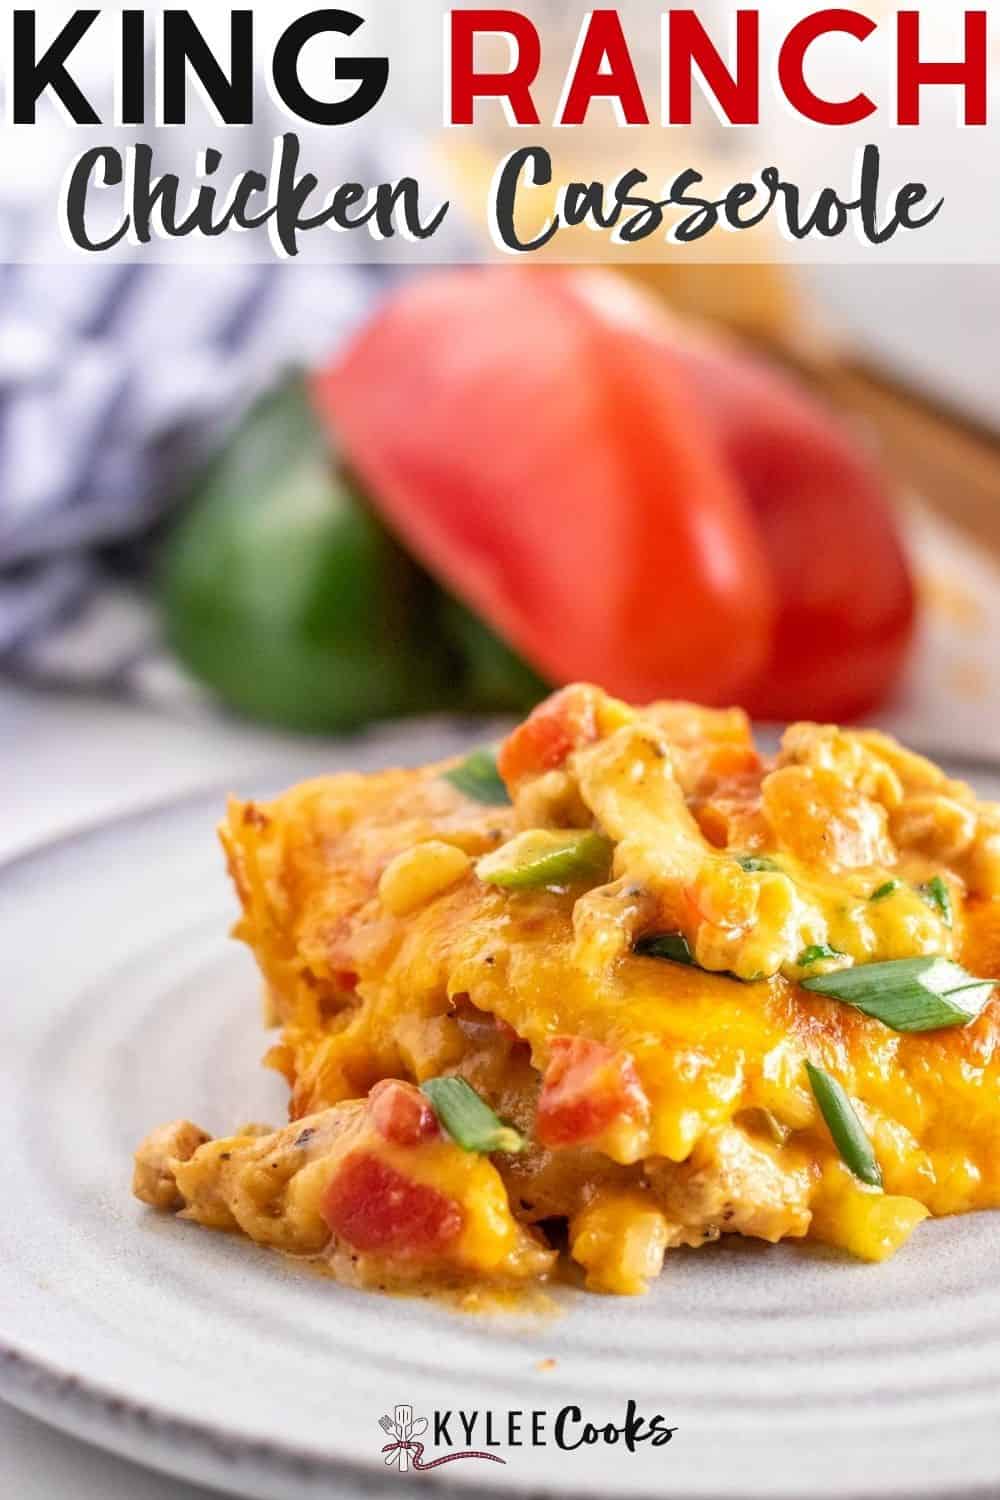 king ranch casserole with recipe name overlaid in text